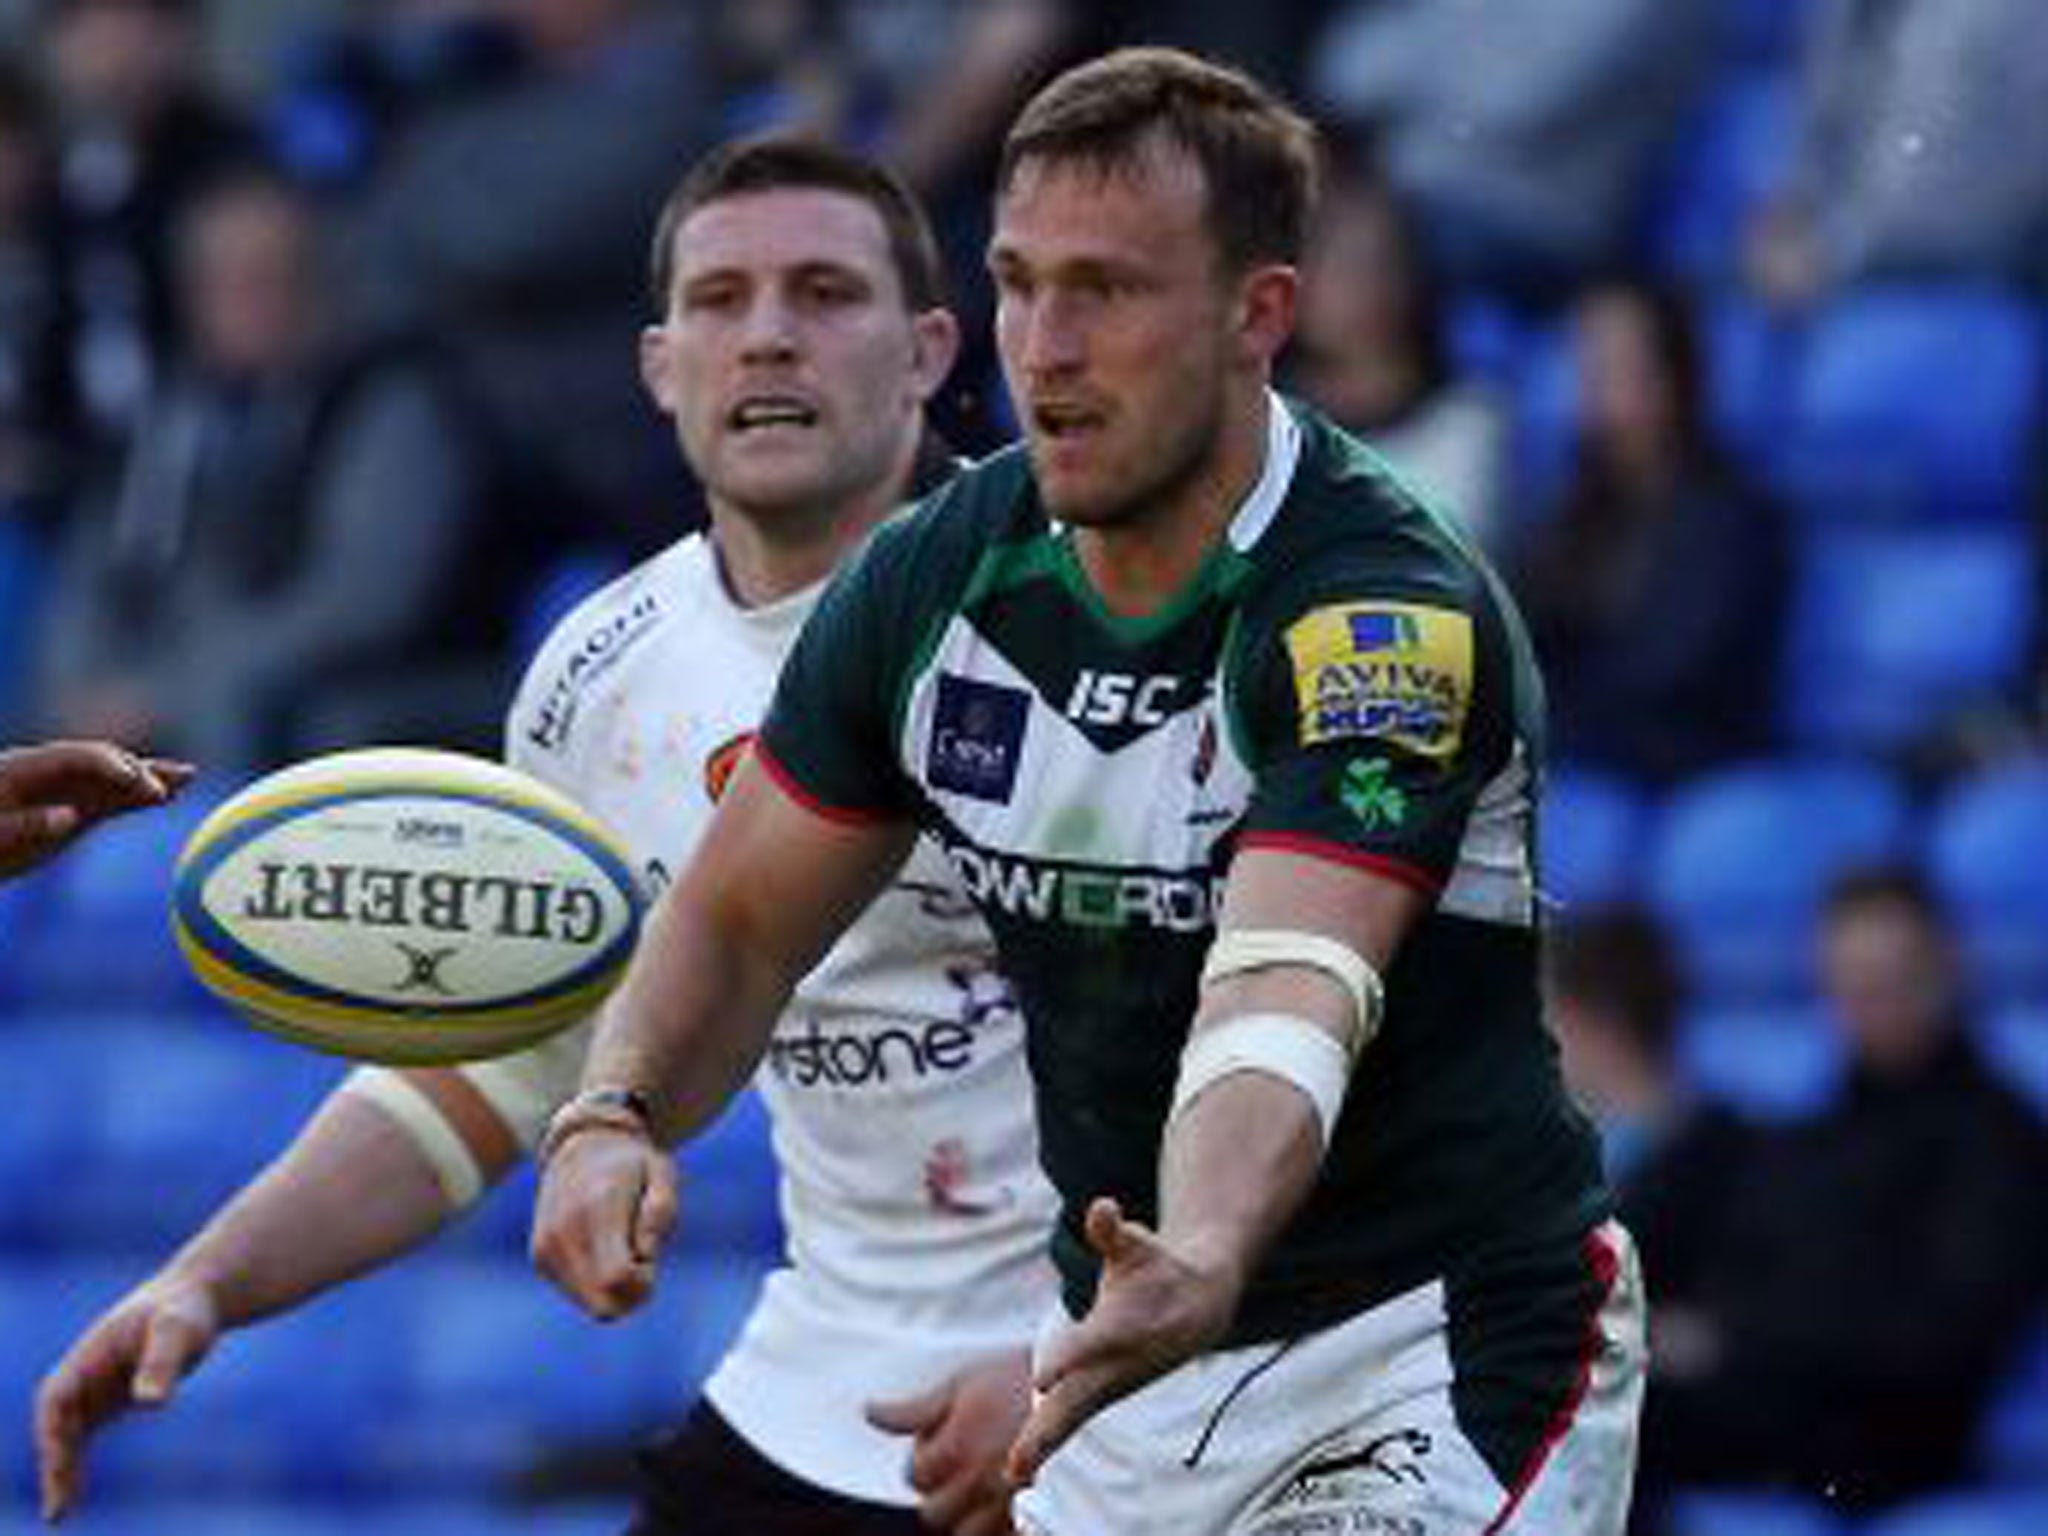 Andrew Fenby scored three tries from the wing for London Irish against struggling Newcastle